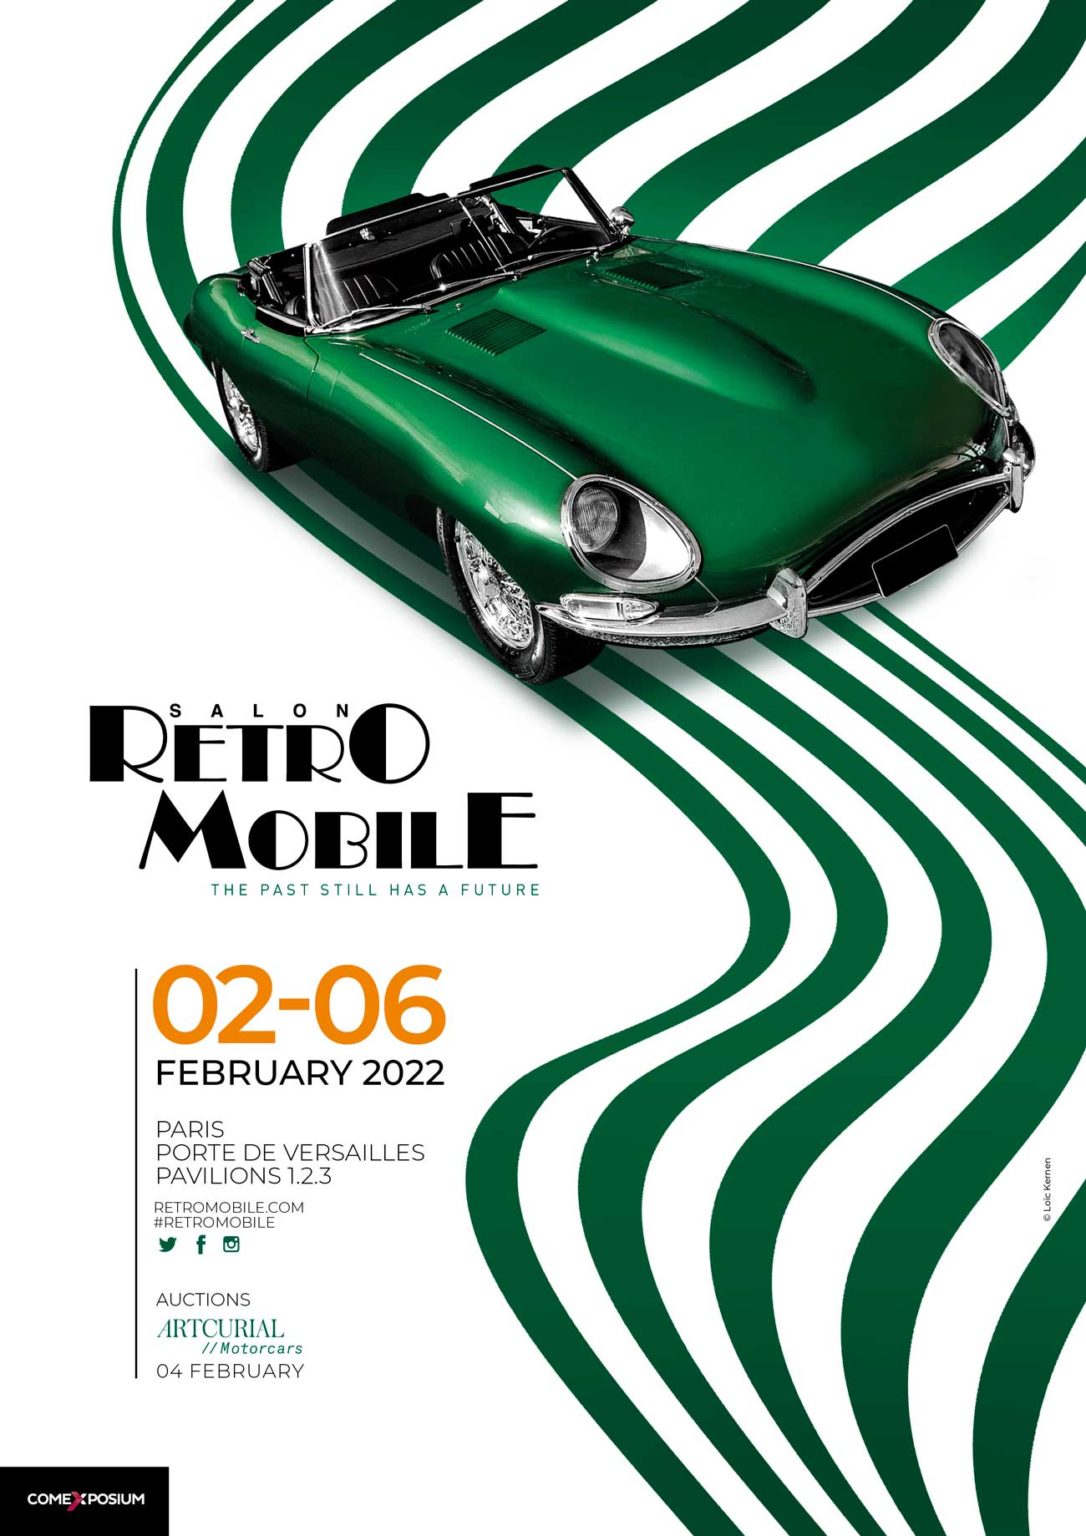 Retromobile In The Spring, Now Postponed Until 16 - 20 March 2022 Poster